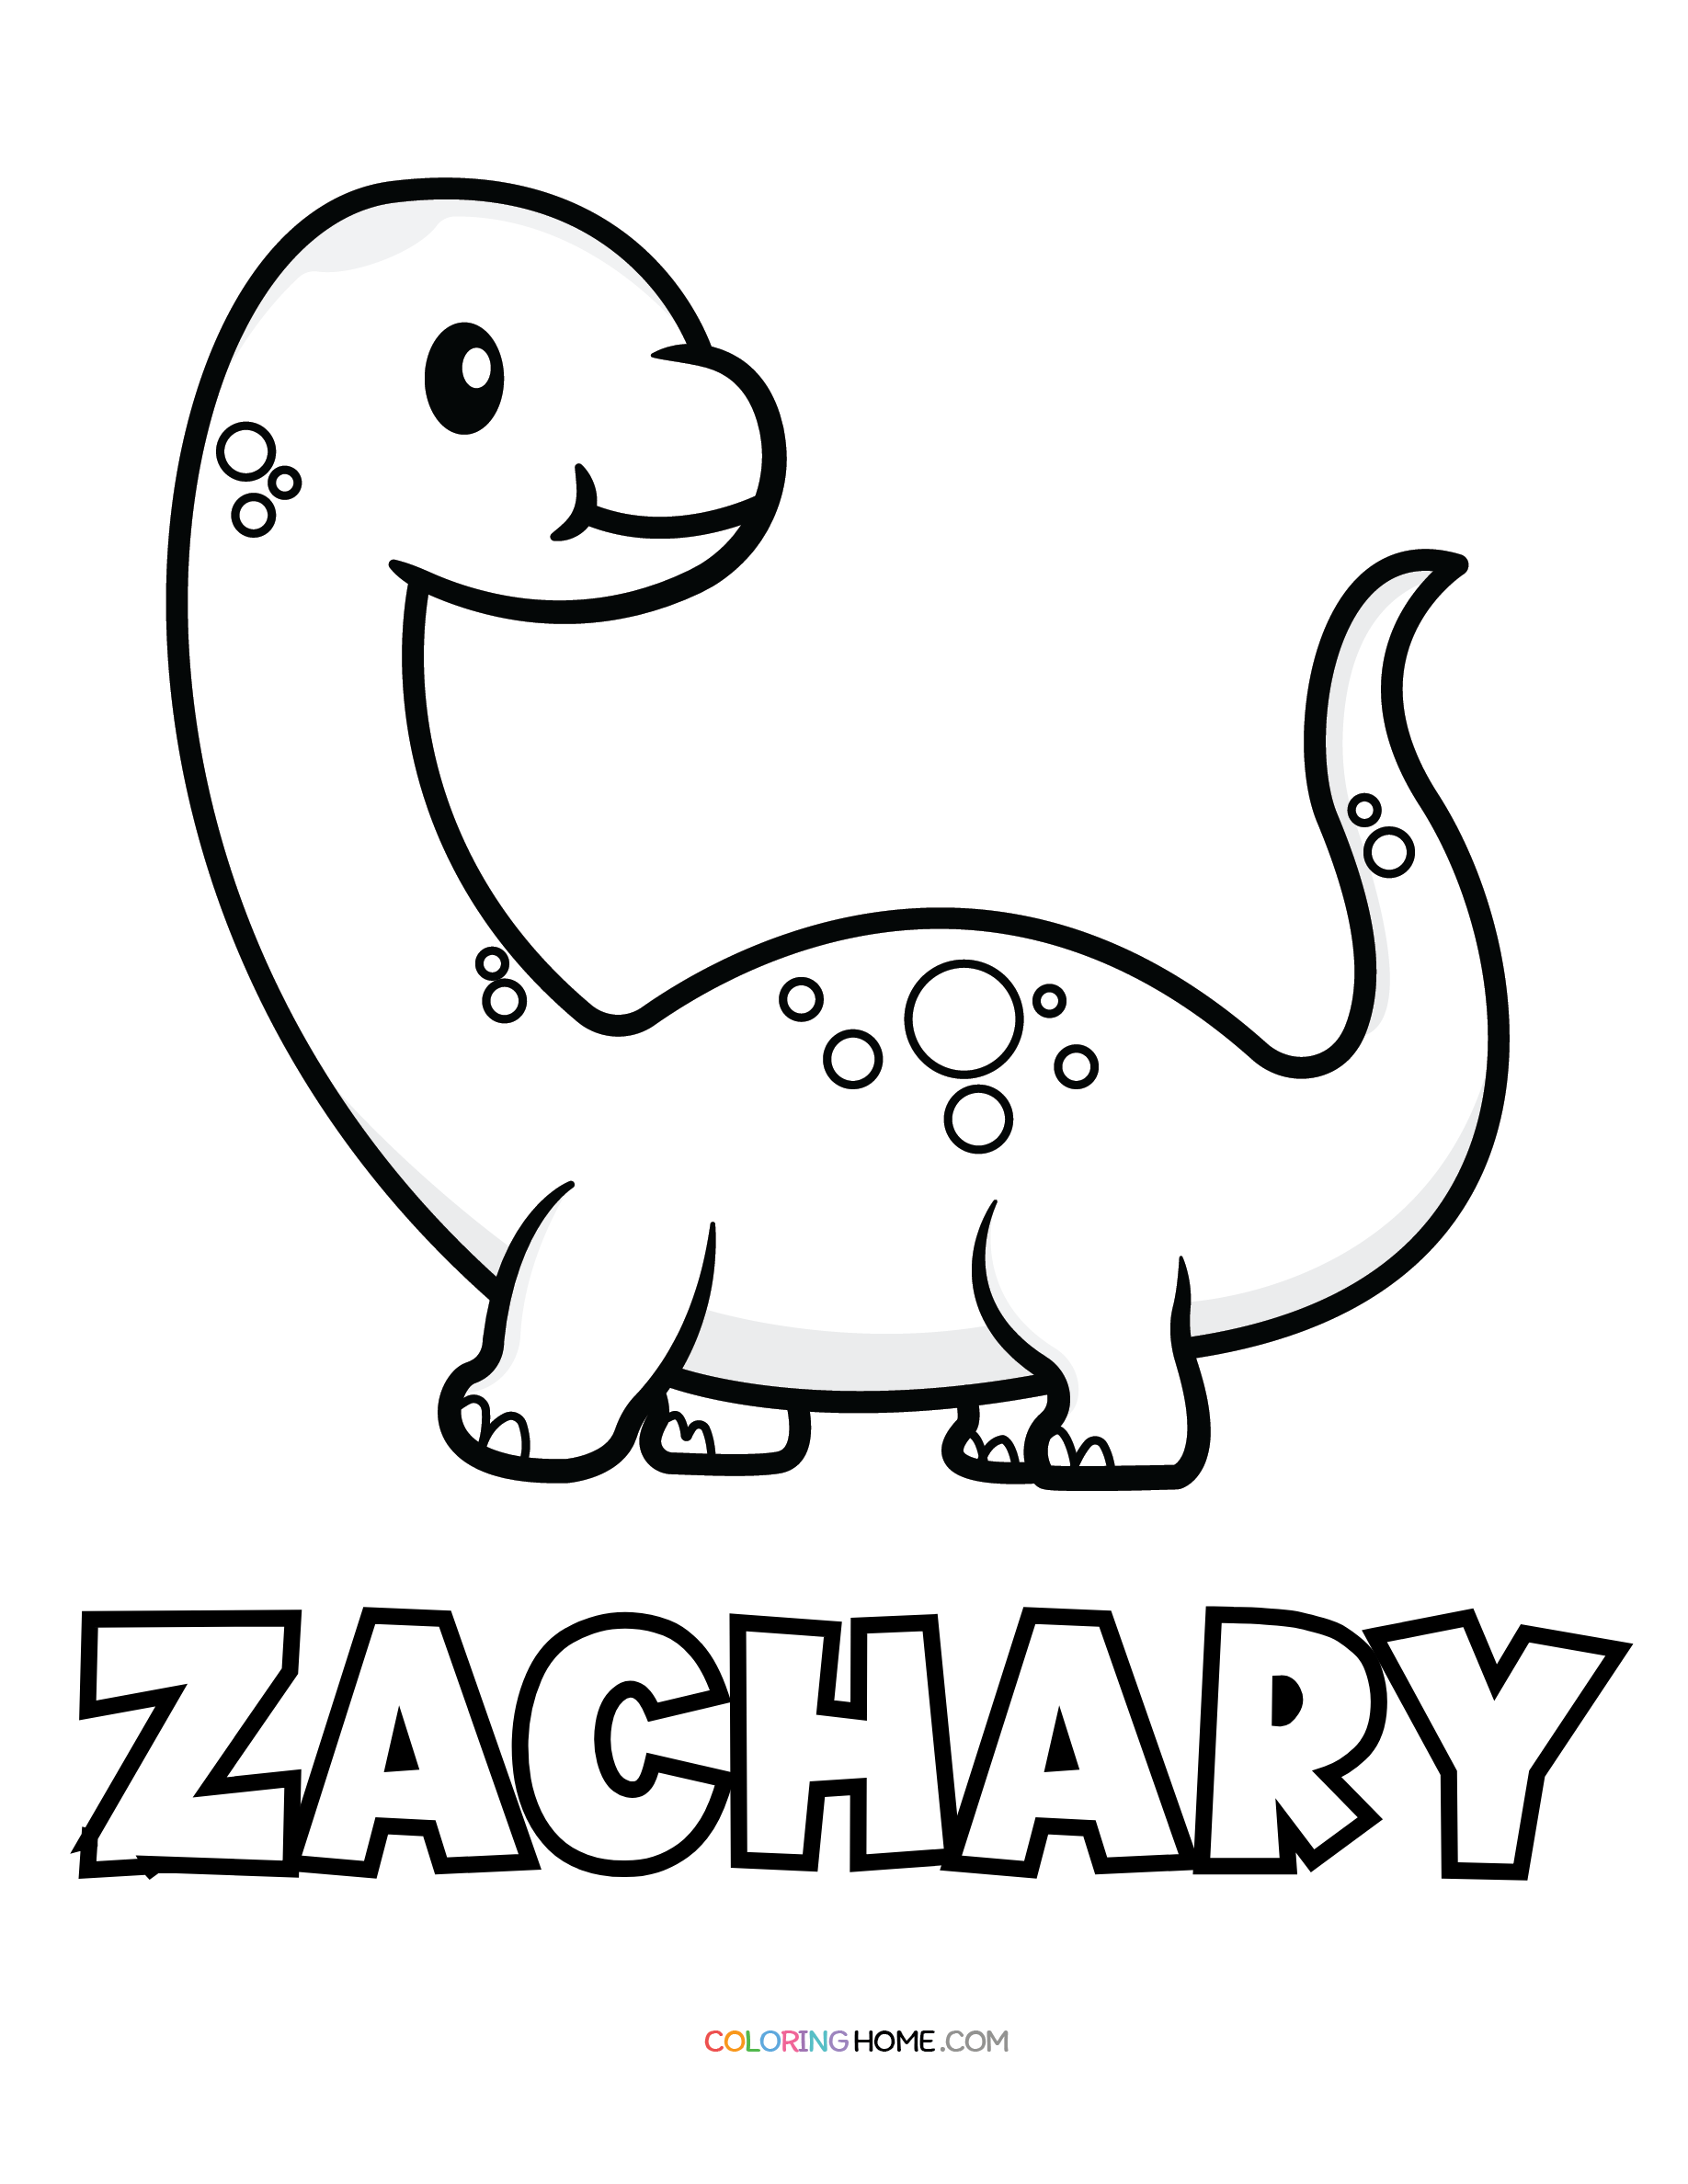 Zachary dinosaur coloring page